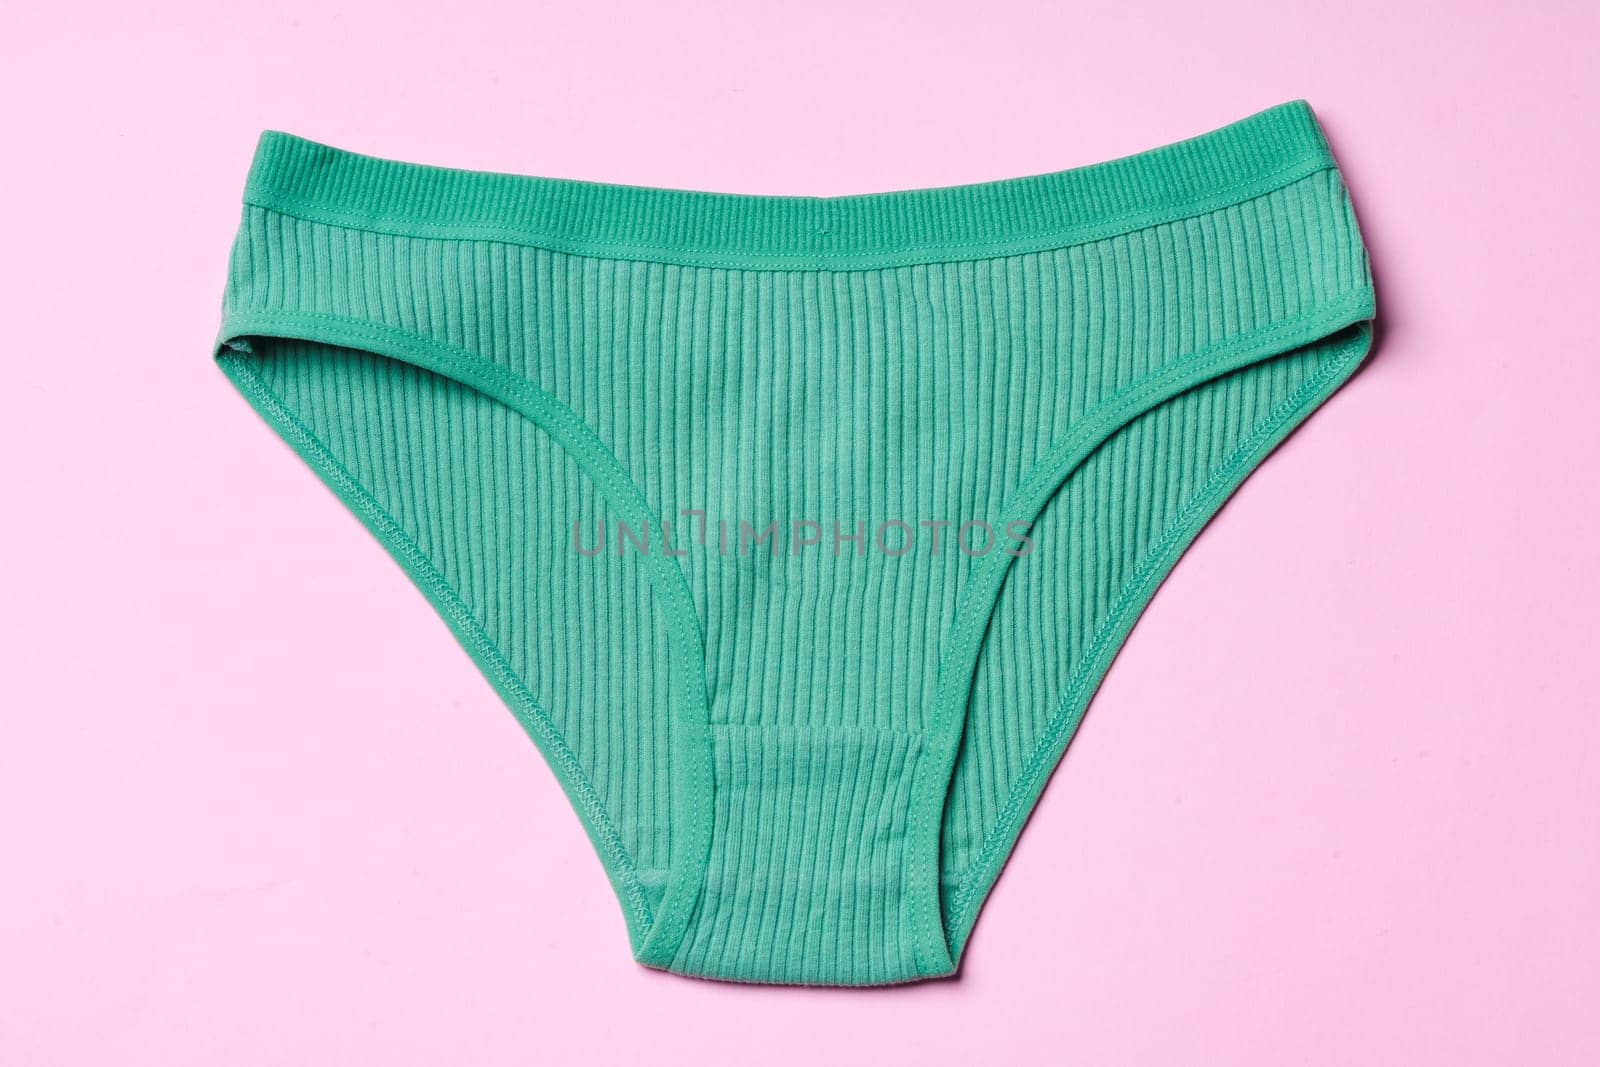 Women's panties on pink background with copy space flat lay